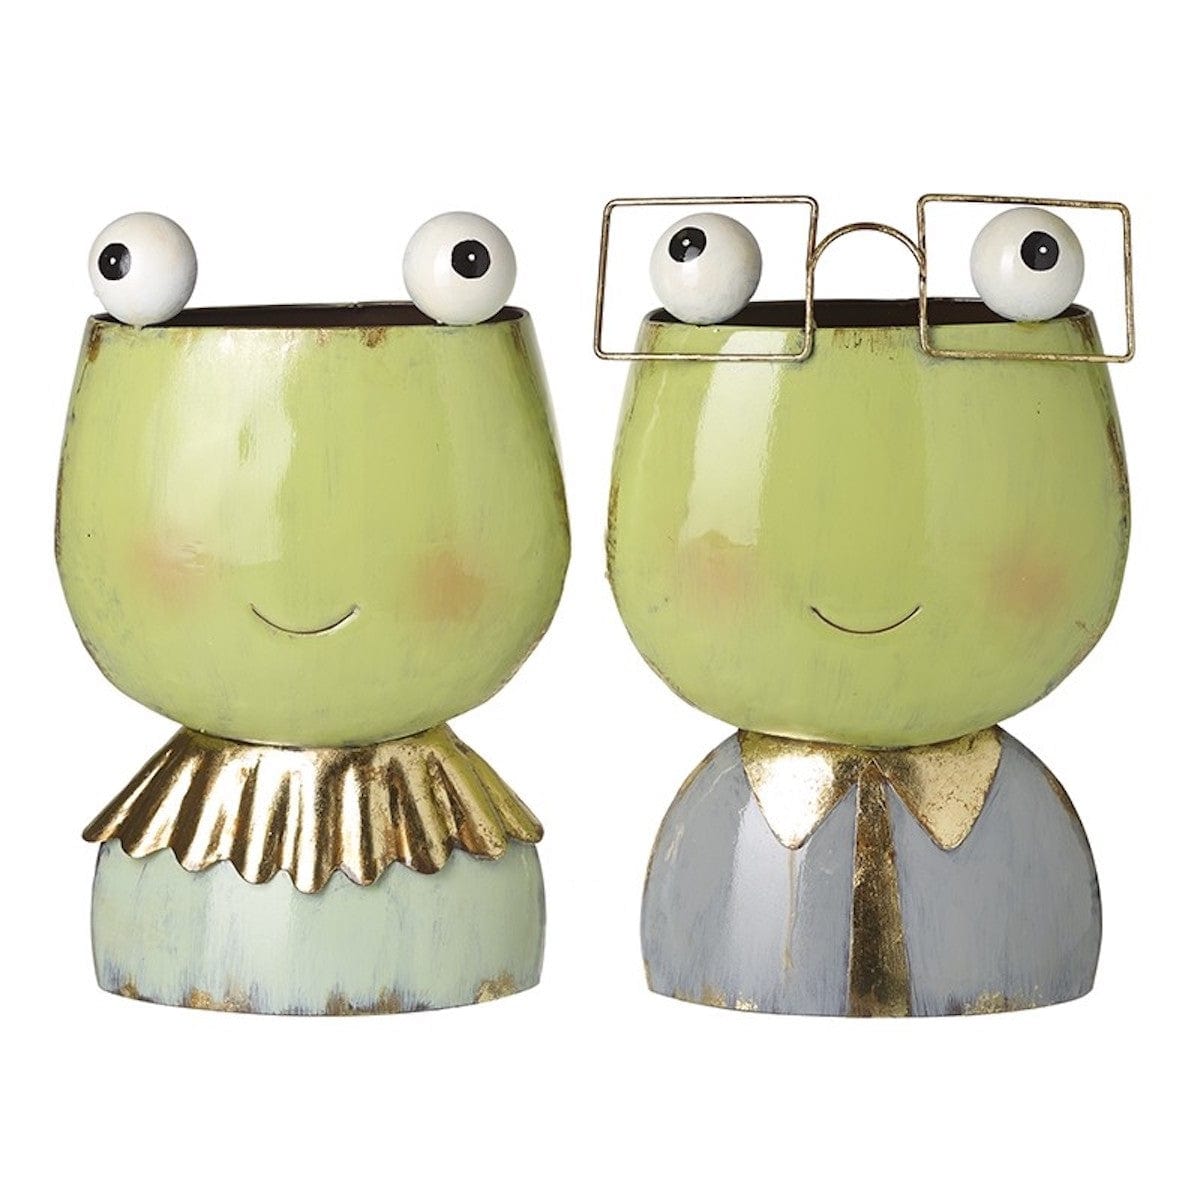 Heaven Sends Easter Decorations Set of 2 Mr and Mrs Metal Frog Planters